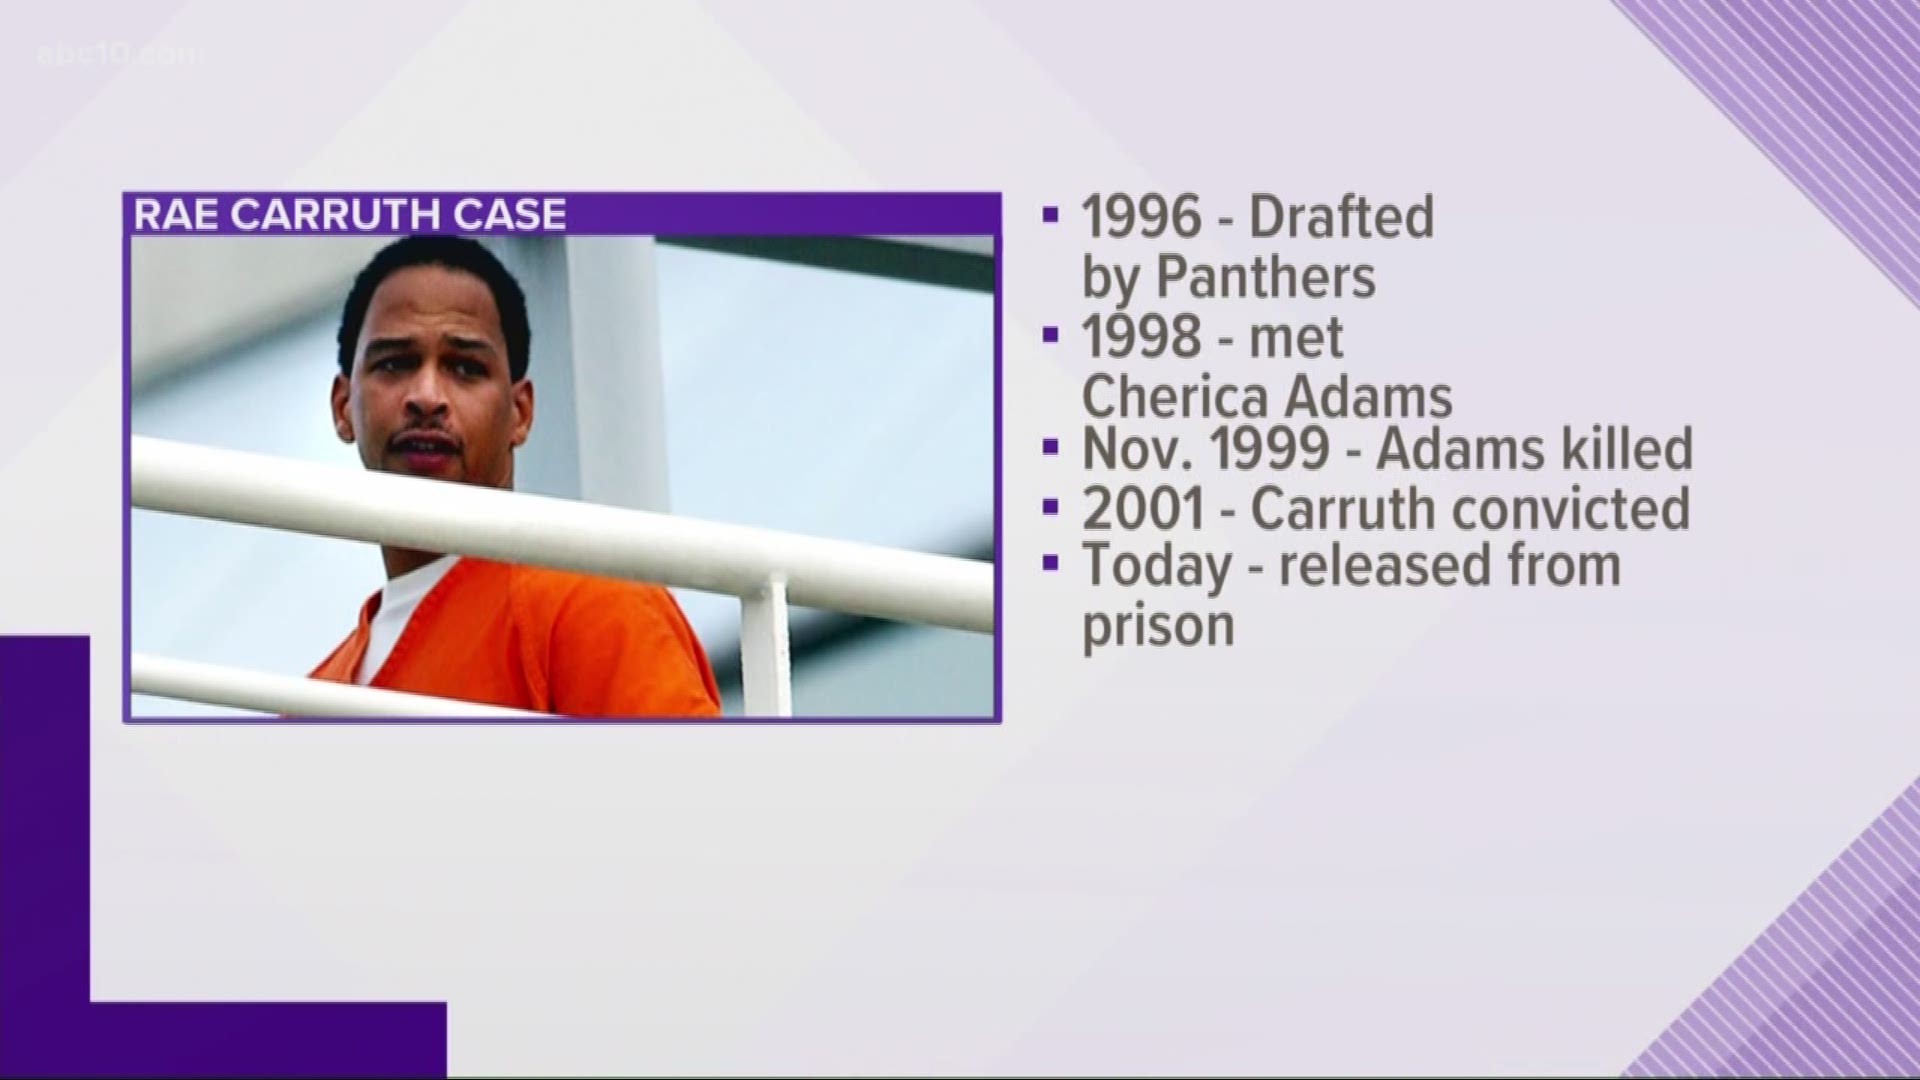 Sacramento native and former Carolina Panther Rae Carruth completed his paperwork for his release from prison and walked out a free man at 8:02 a.m. Monday, Oct. 22, after serving nearly 19 years.